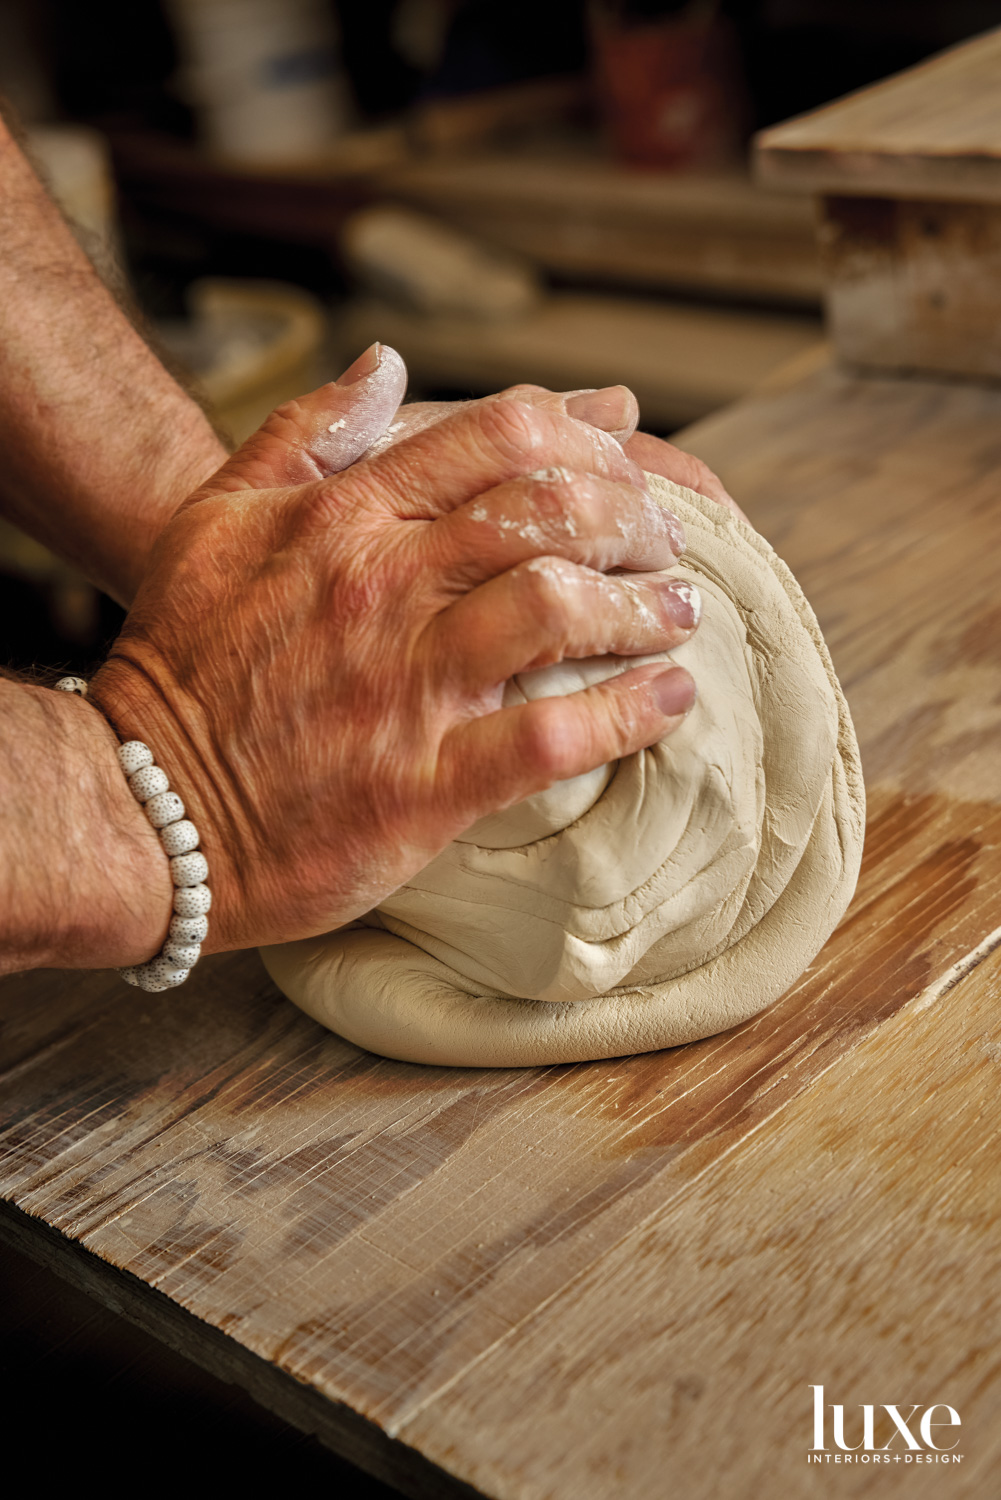 A pair of hands kneeding clay.